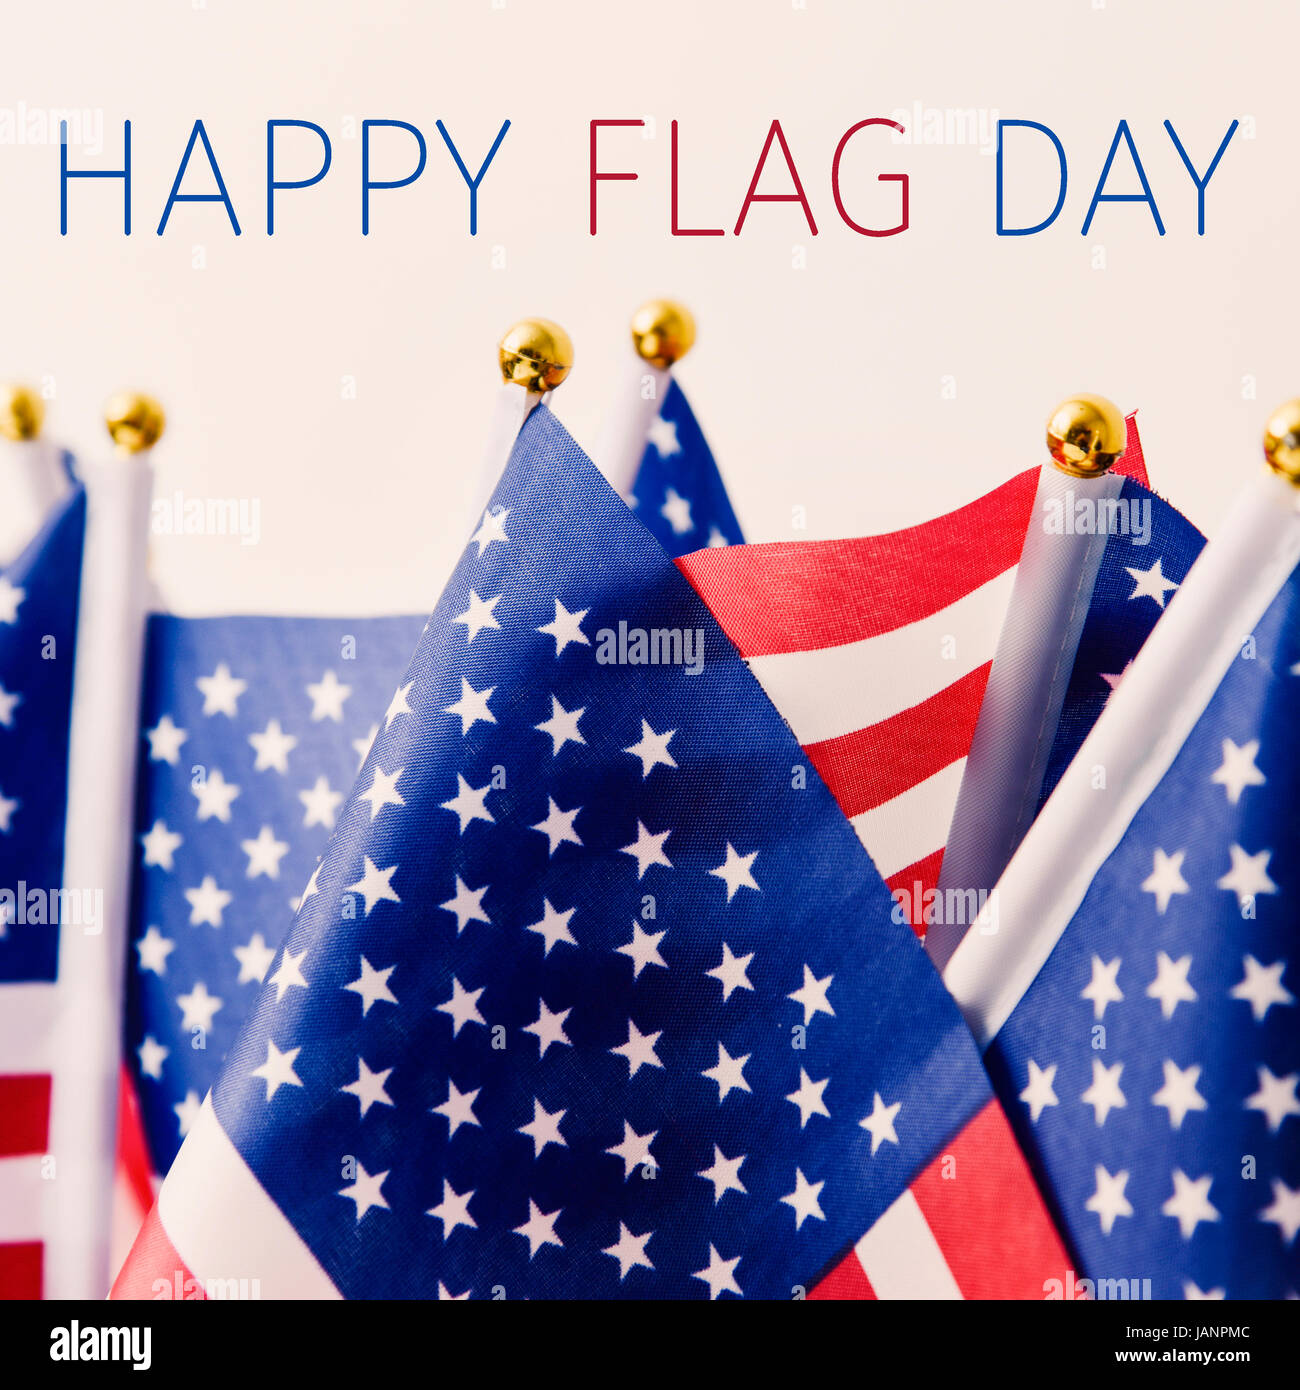 the text happy flag day and many flags of the United States against an off-white background Stock Photo